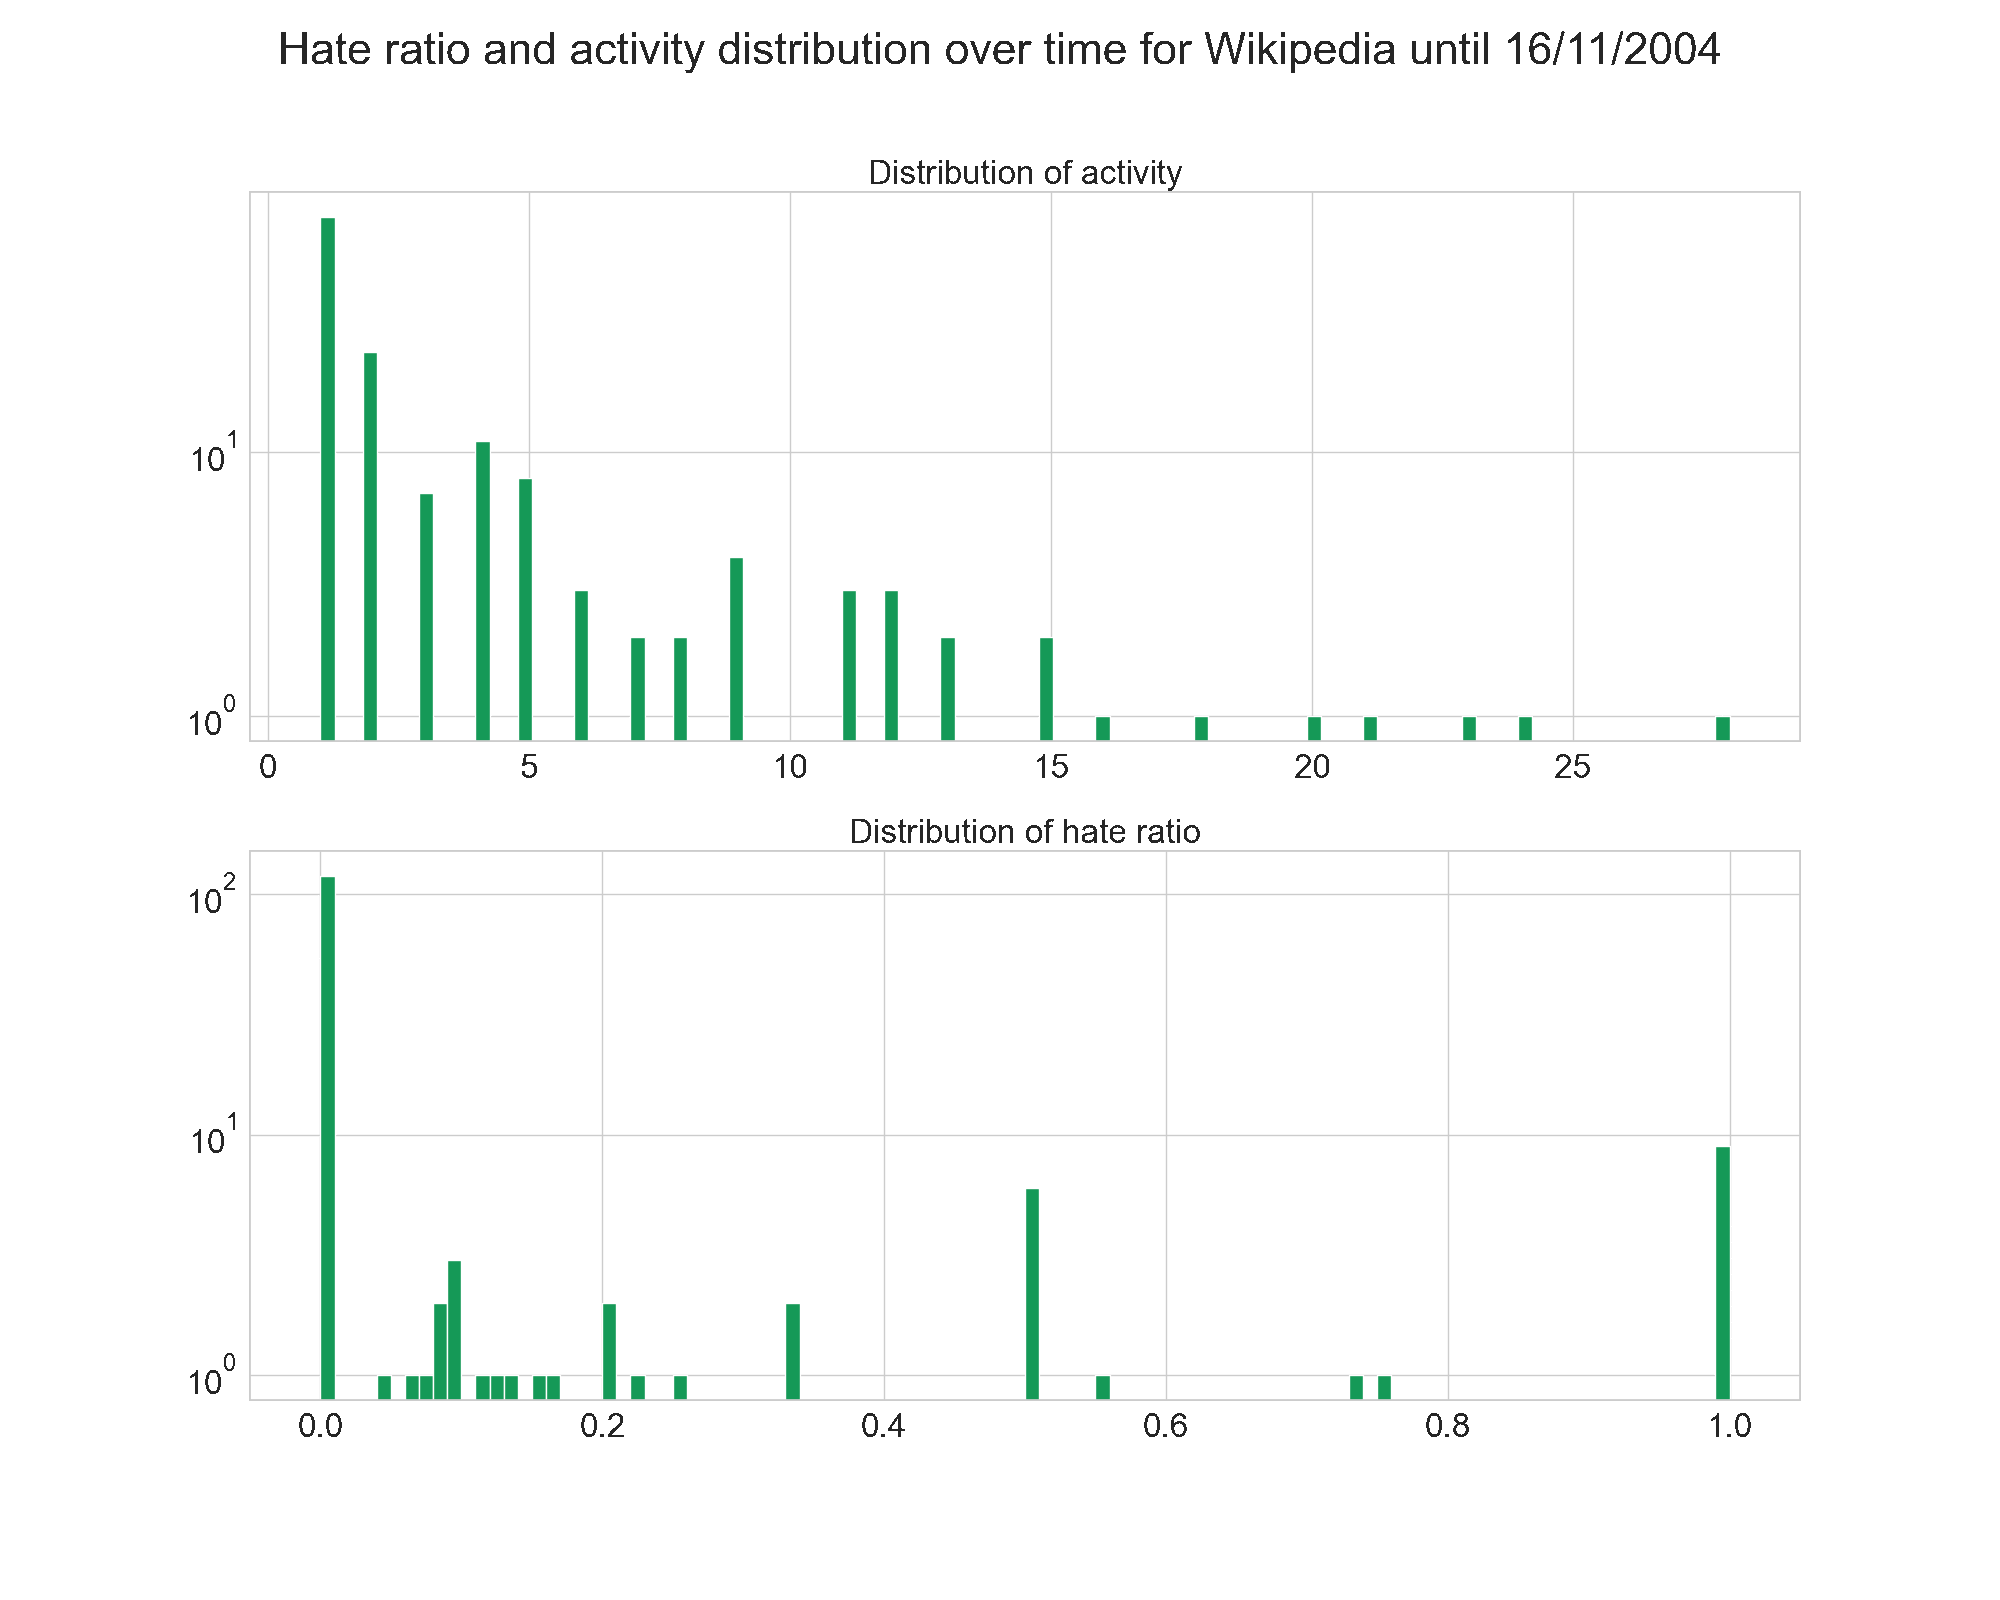 Distribution of activity and hate ratio for wikipedia over time